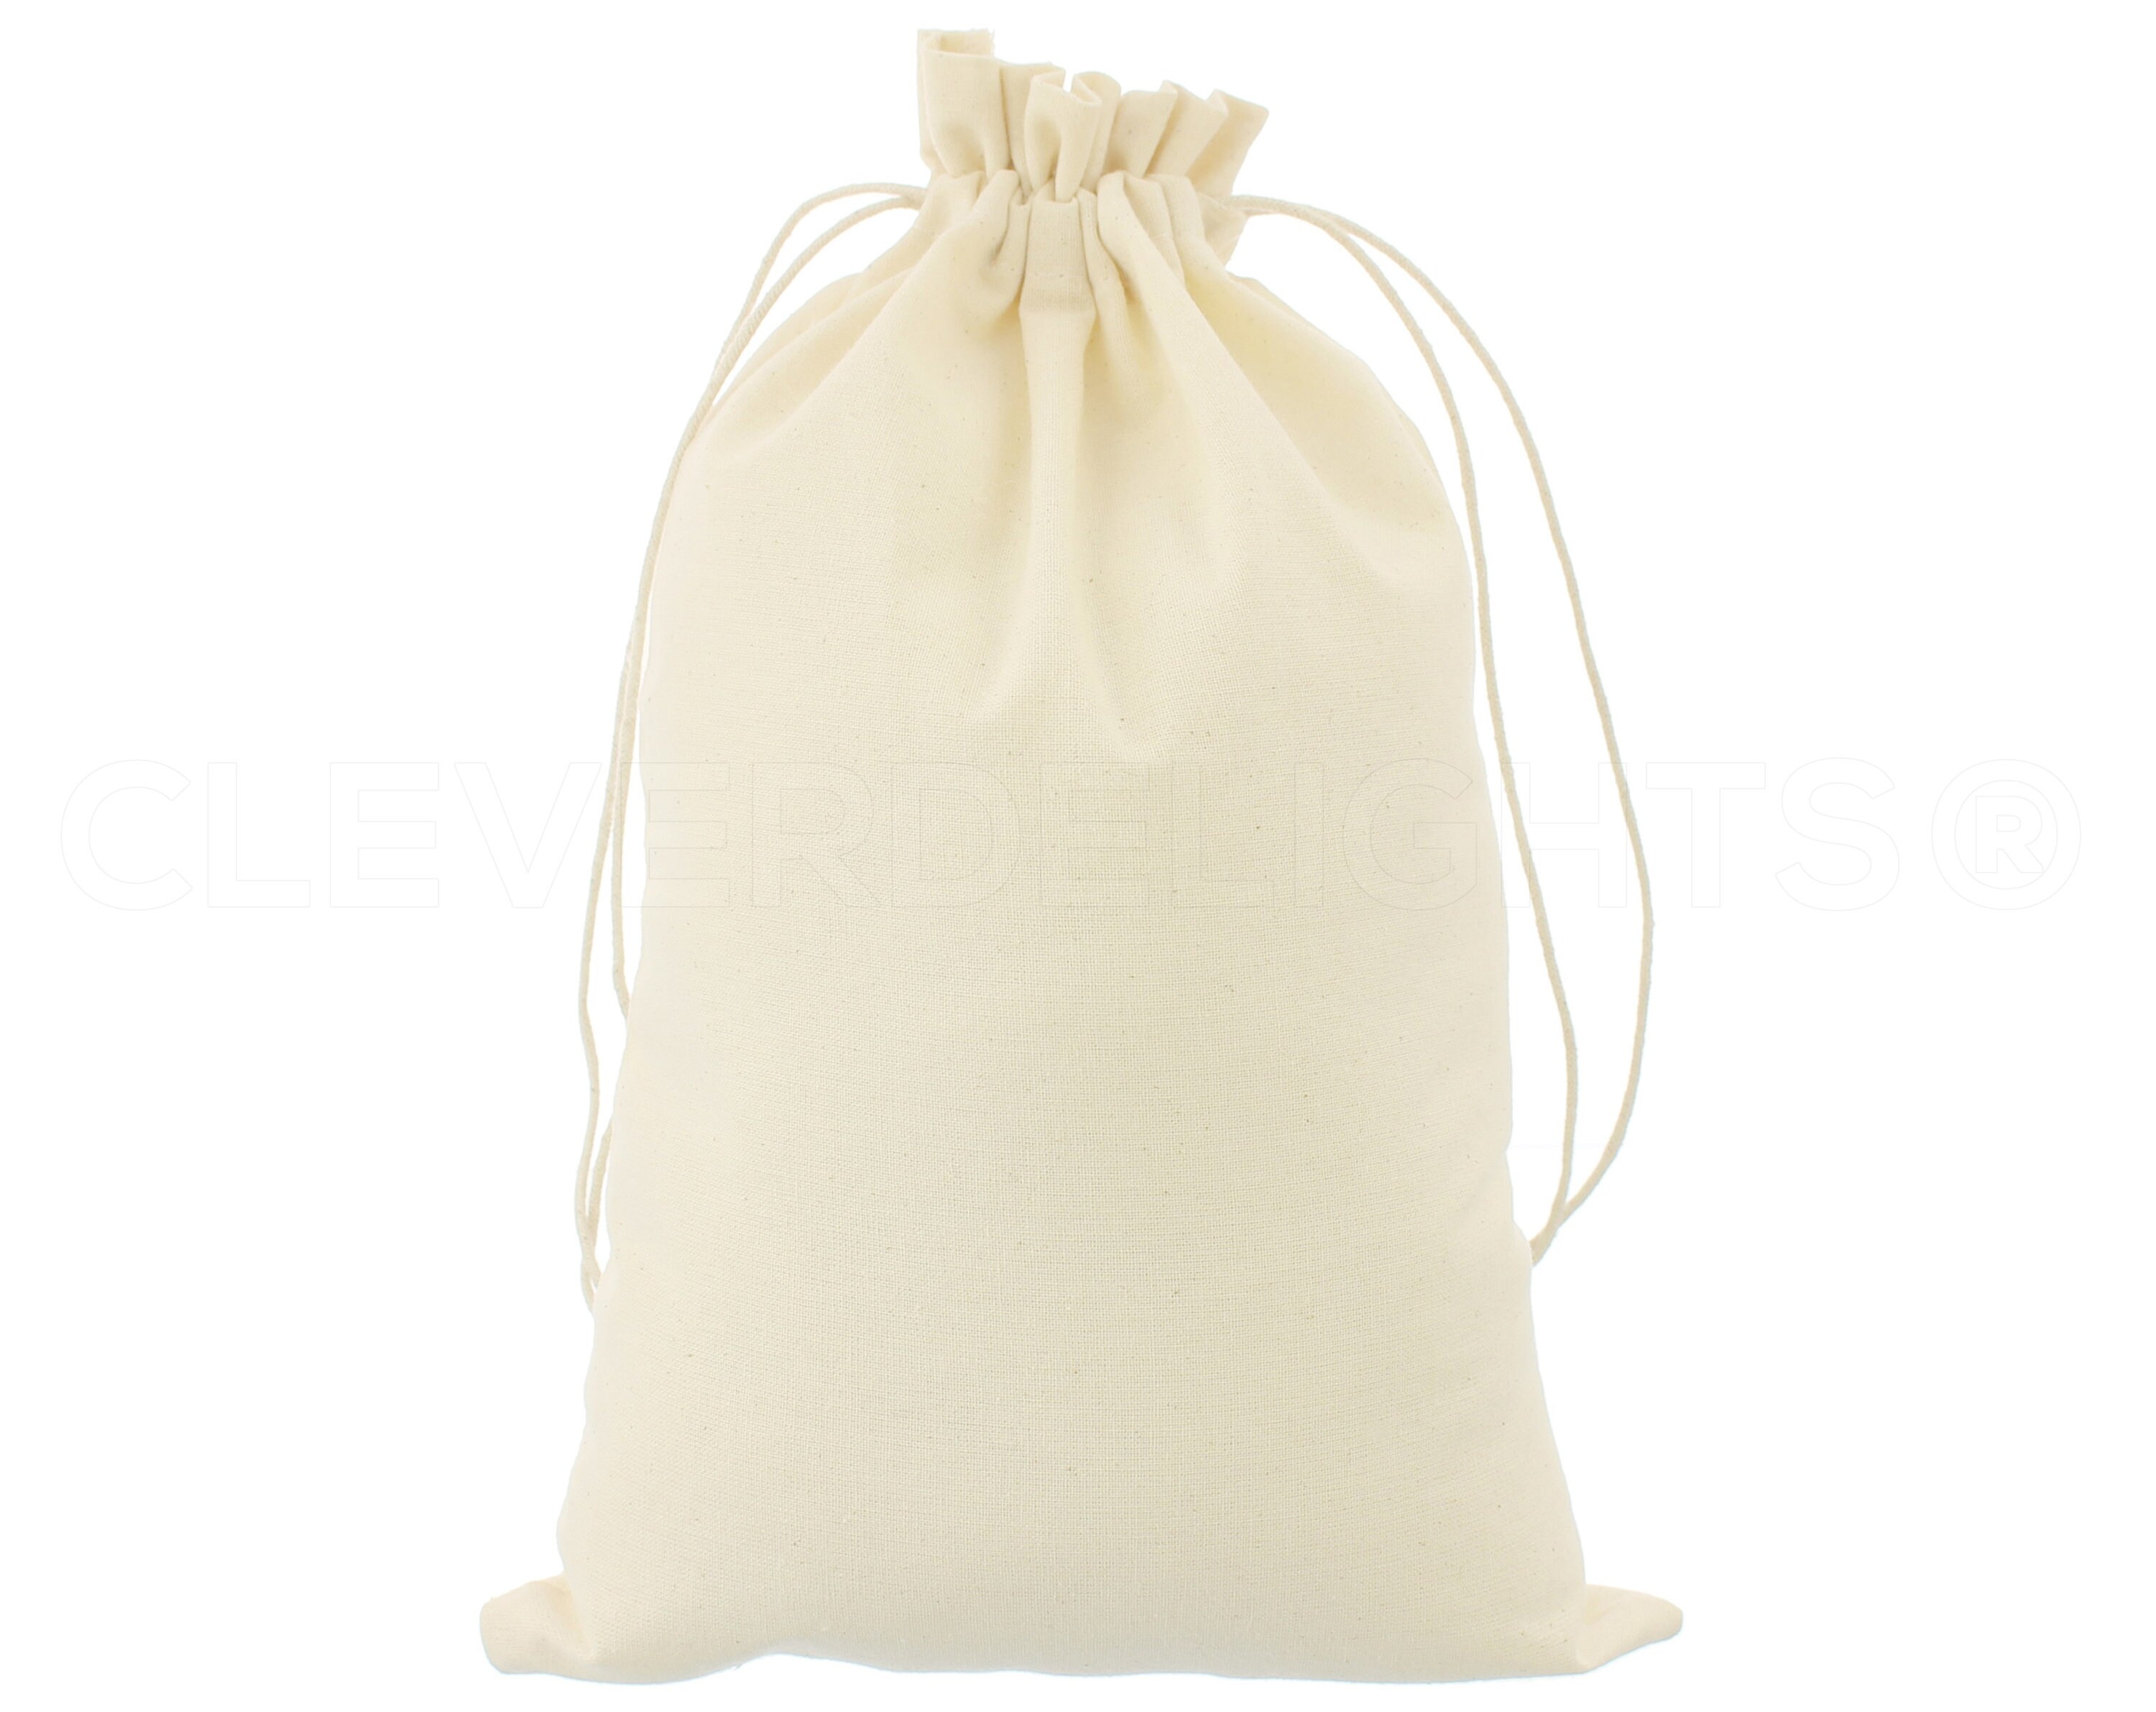 CleverDelights Cotton Bags - 8 x 12 - 10 Pack - Premium Muslin Drawstring  Bag